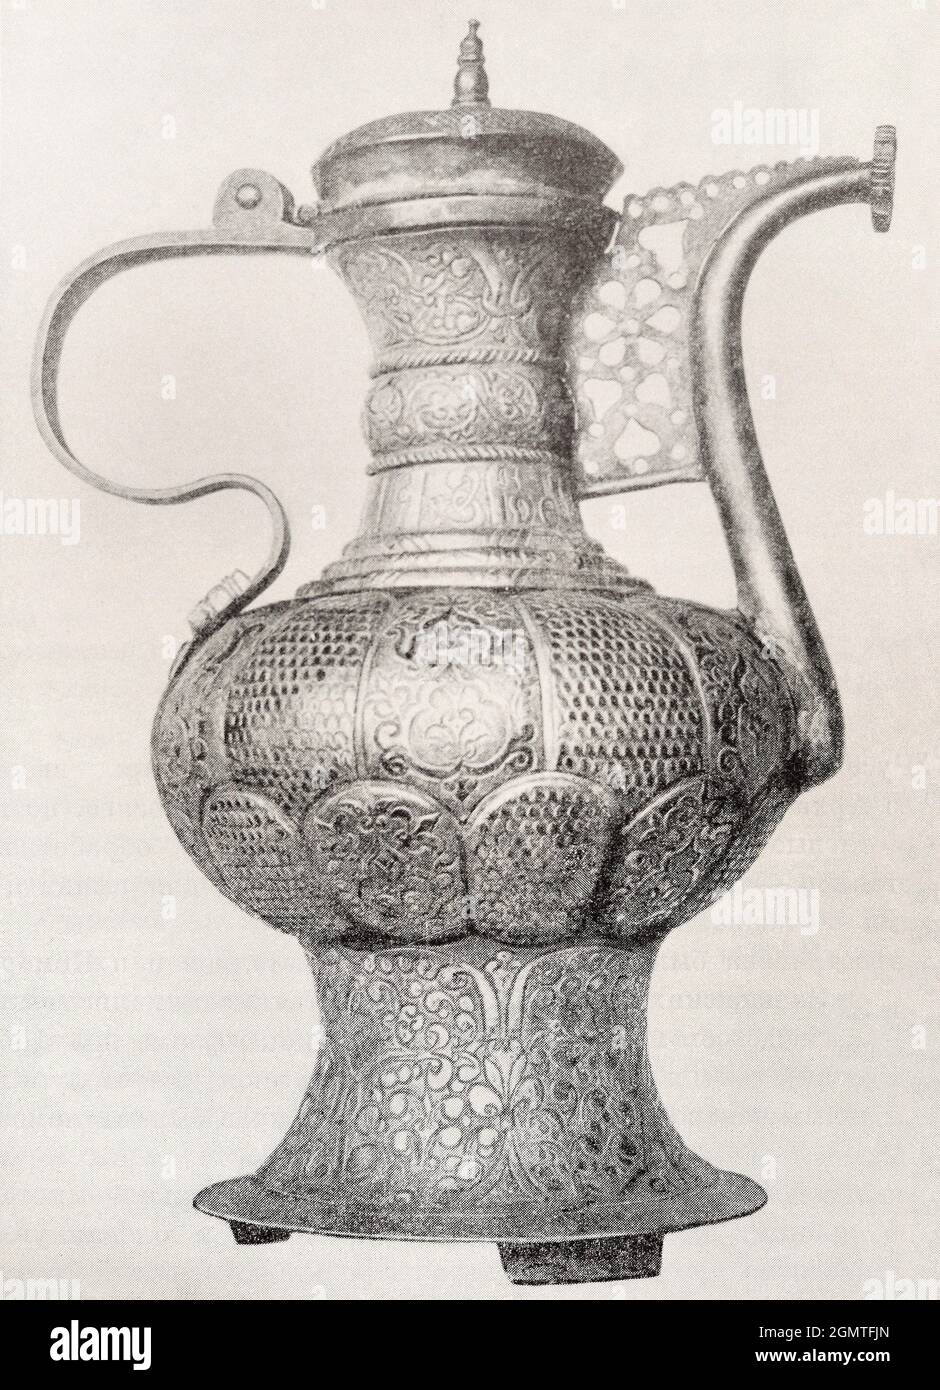 Hammered copper jug from 1671. Stock Photo